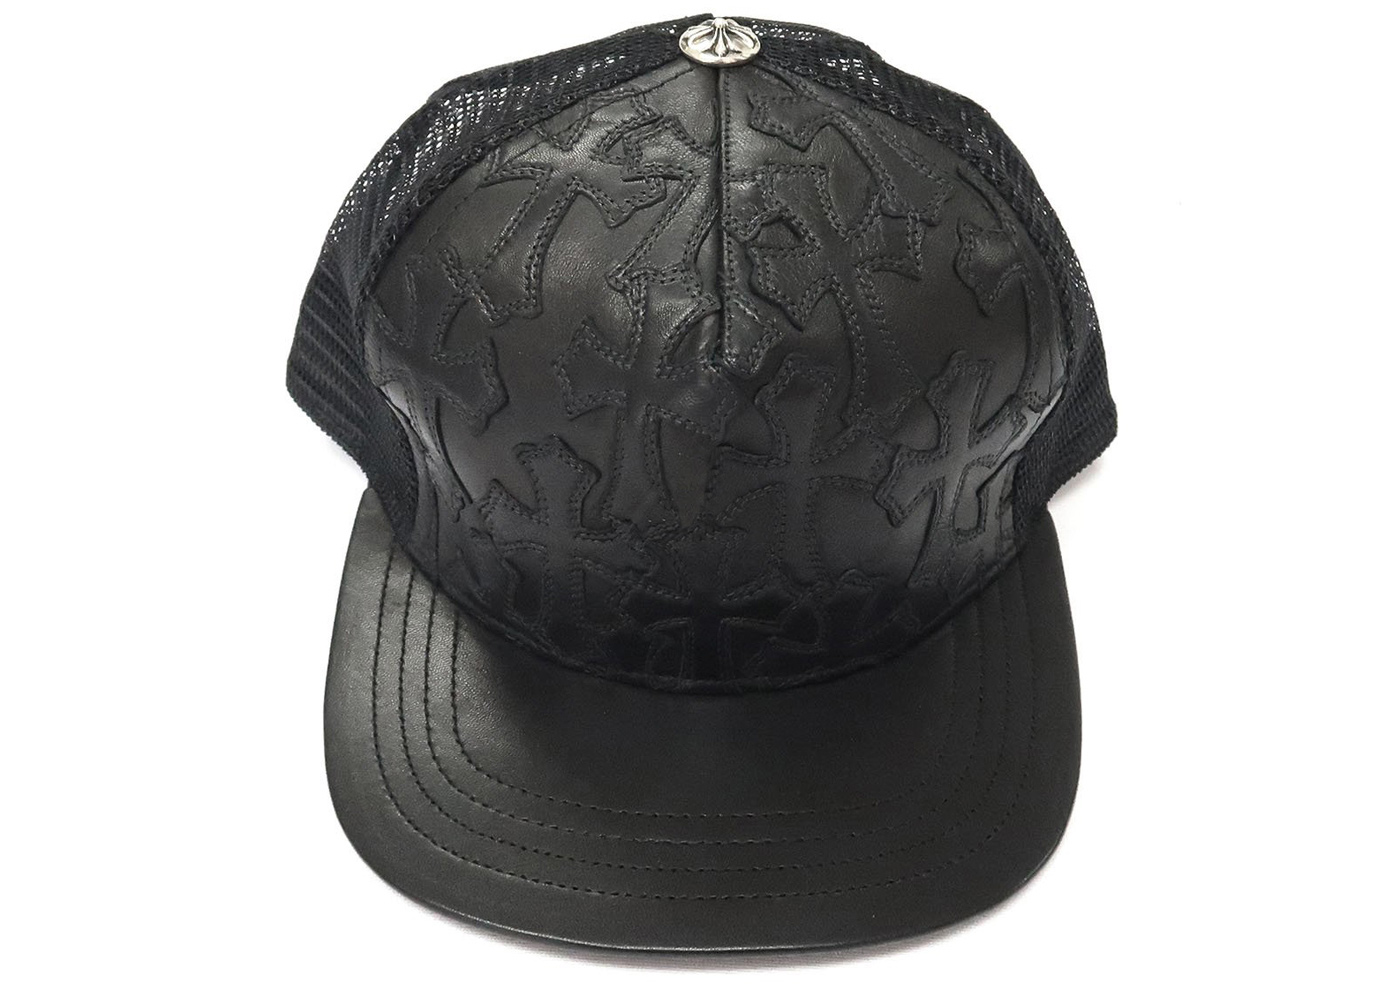 Chrome Hearts Cemetary Cross Leather Stitched Trucker Hat Black - US